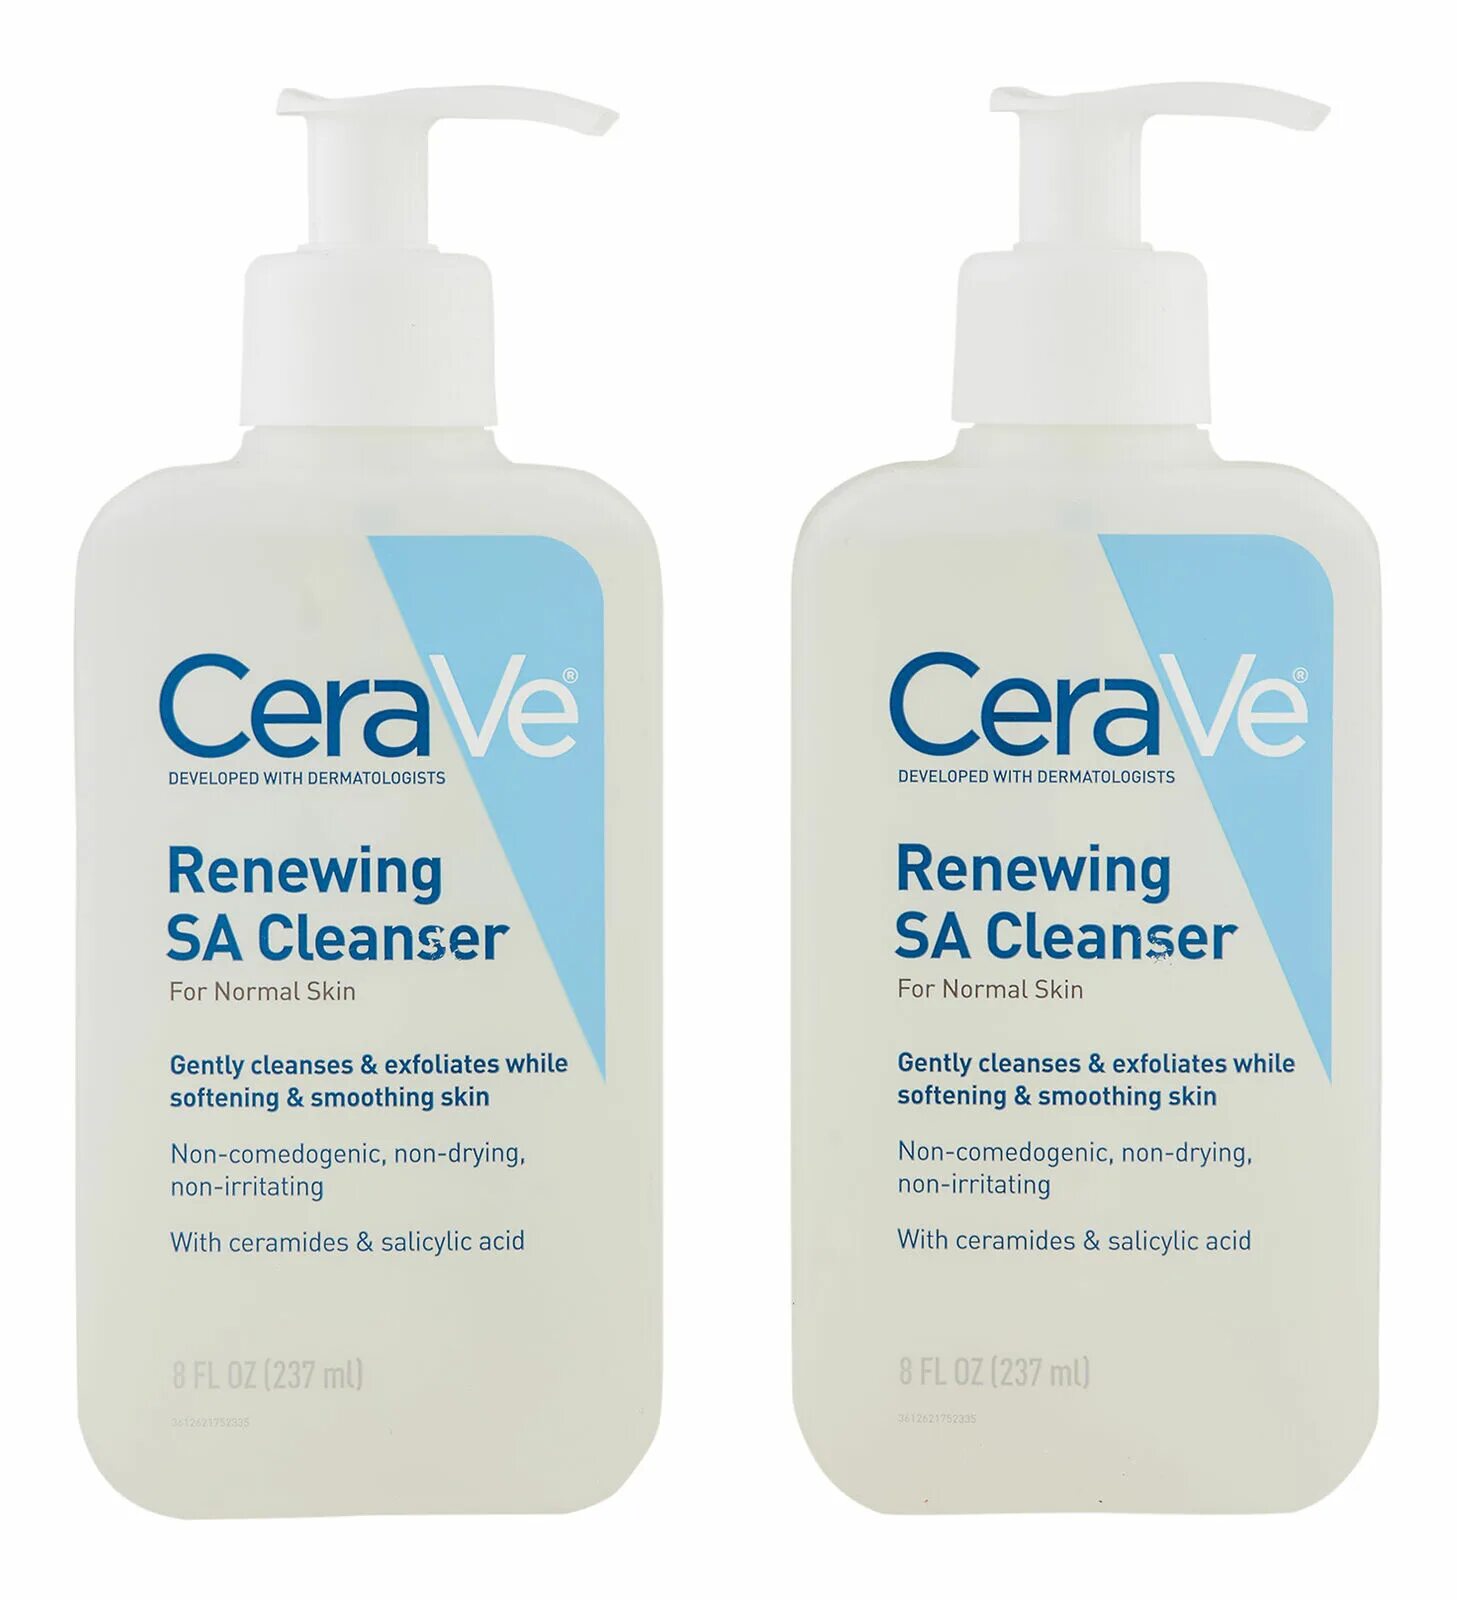 CERAVE sa Cleanser Bar. CERAVE Renewing sa Cleanser. CERAVE sa Smoothing Cleanser. CERAVE sa очищающий гель. Smoothing cleanser